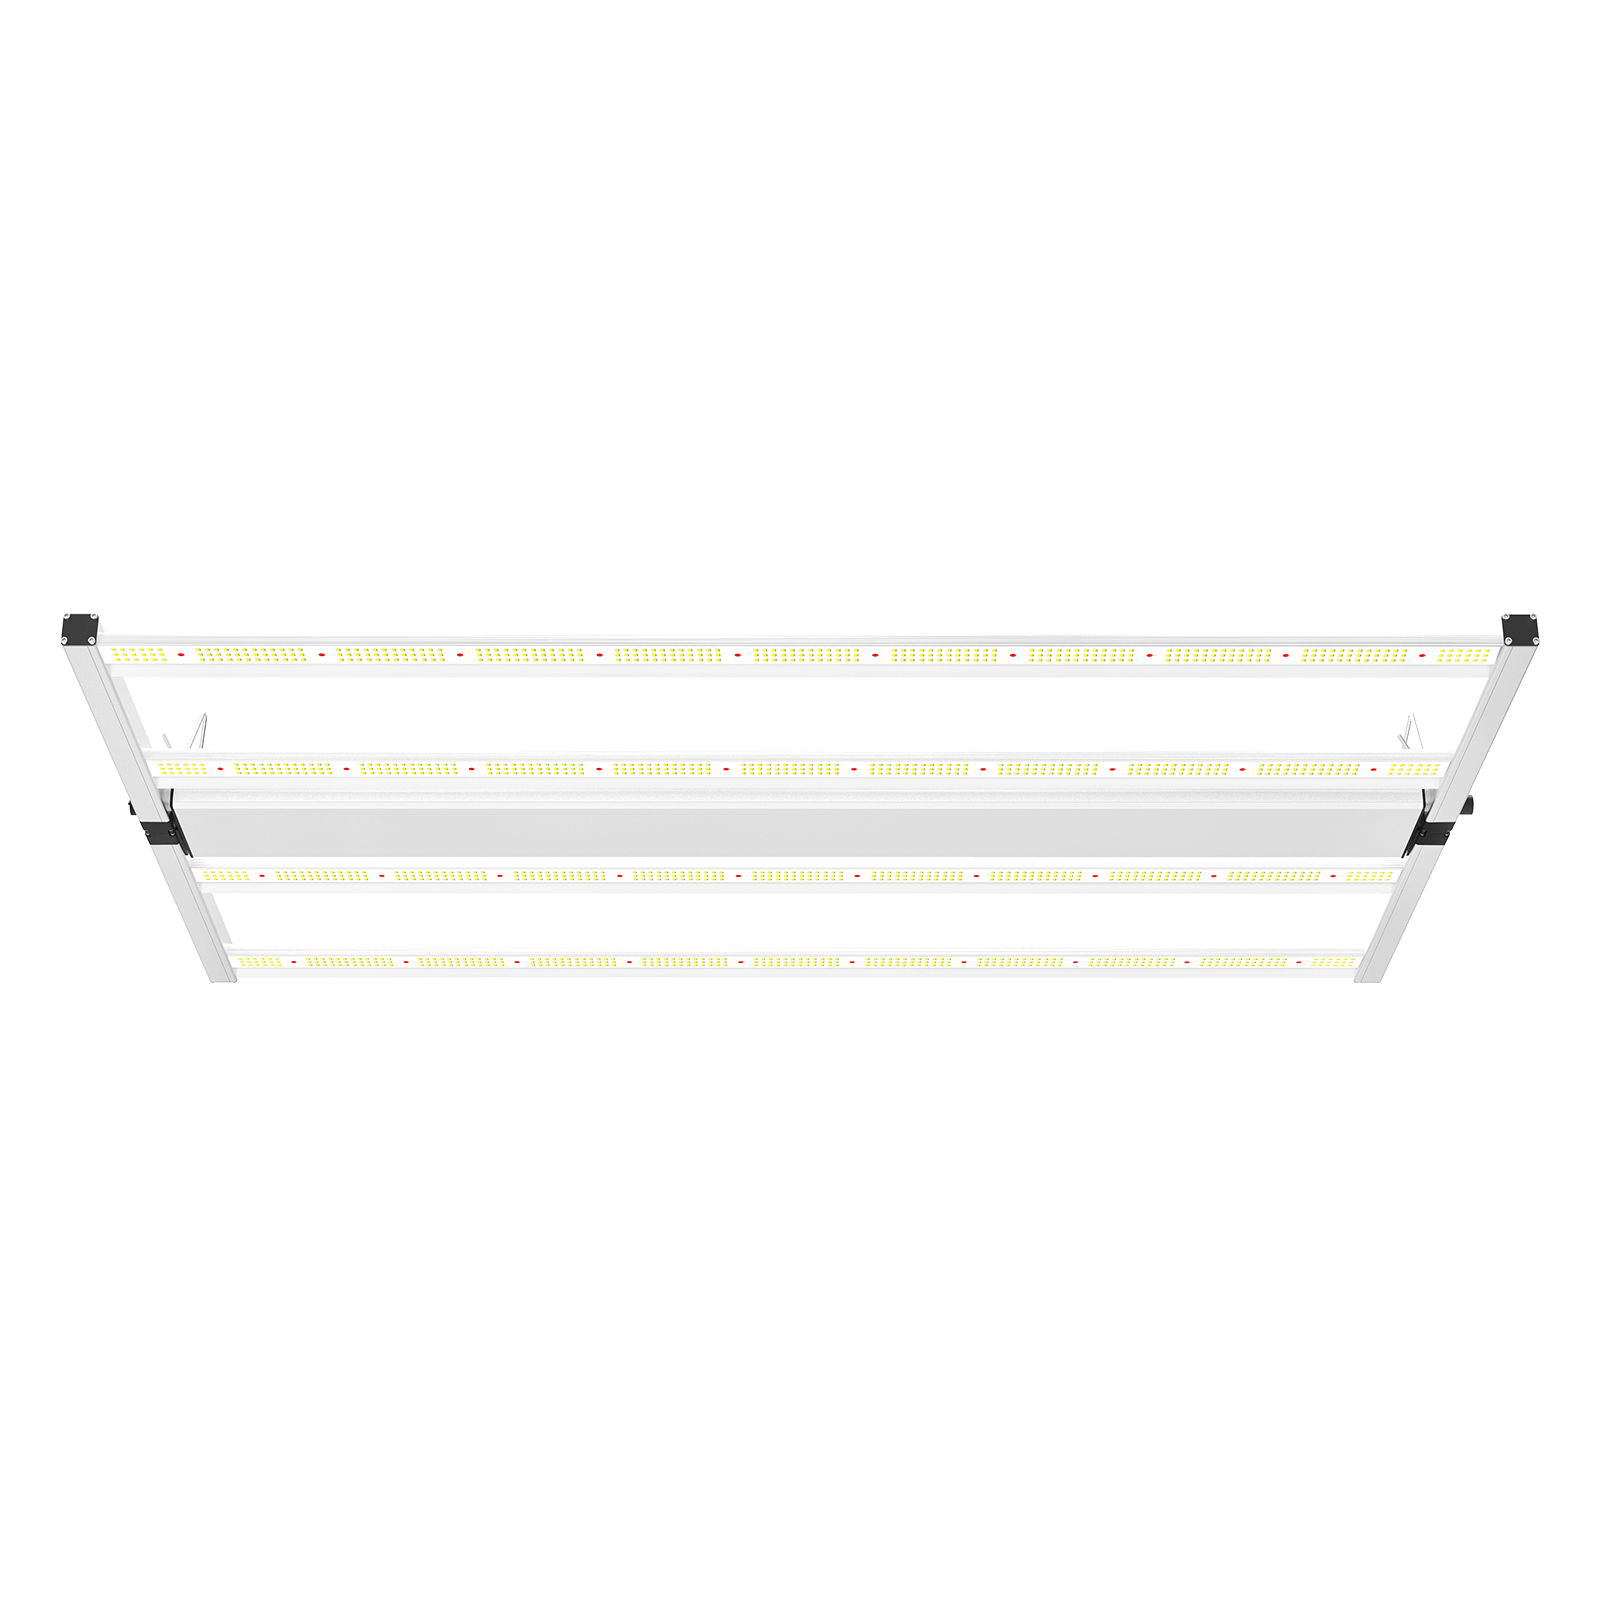 CT-250 Full Spectrum LED Grow Light - 250W, 2.7 μmol/J, Dimmable, 984 pcs Diodes | Cultiuana